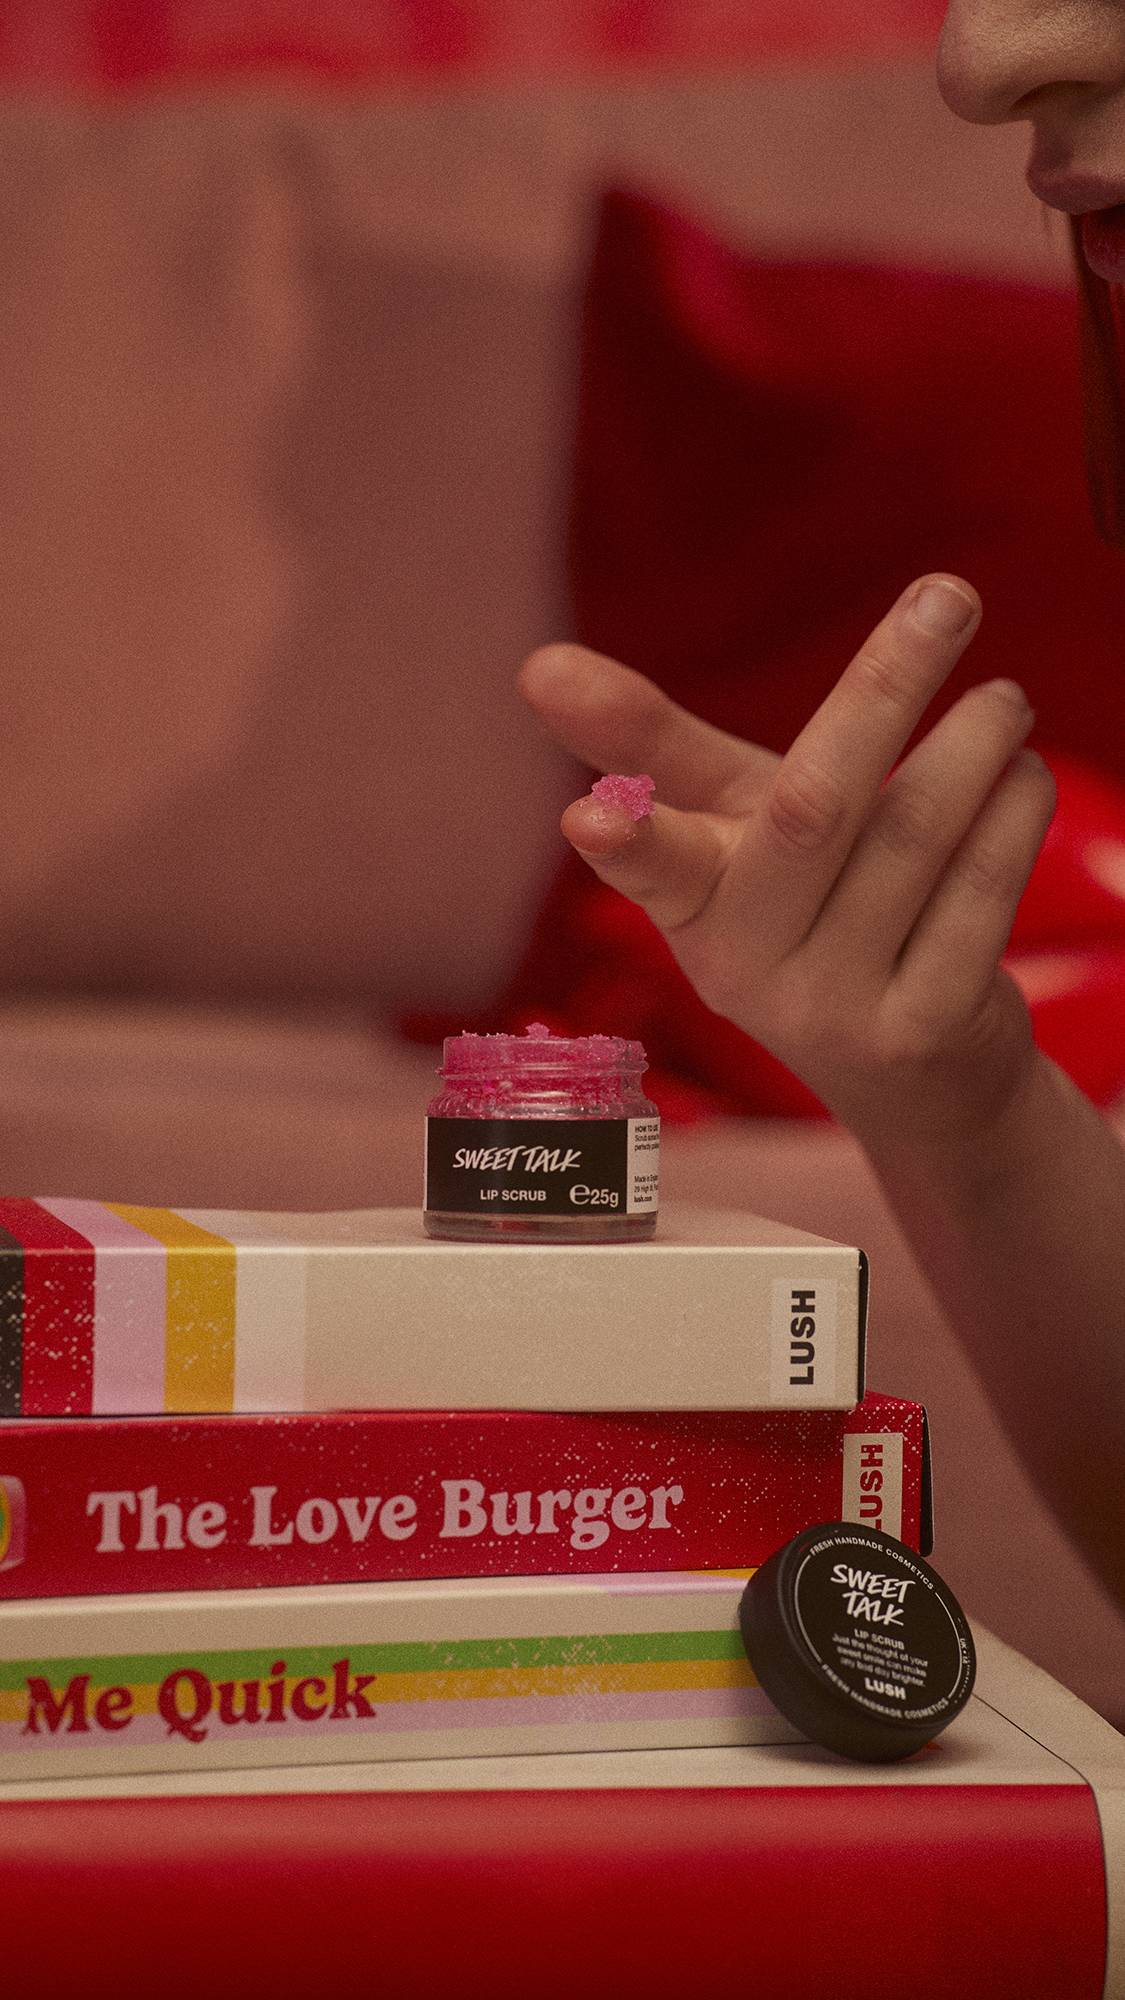 The Sweet Talk lip scrub pot is on a stack of VHS tape boxes as the model scoops out some product onto their fingertip.